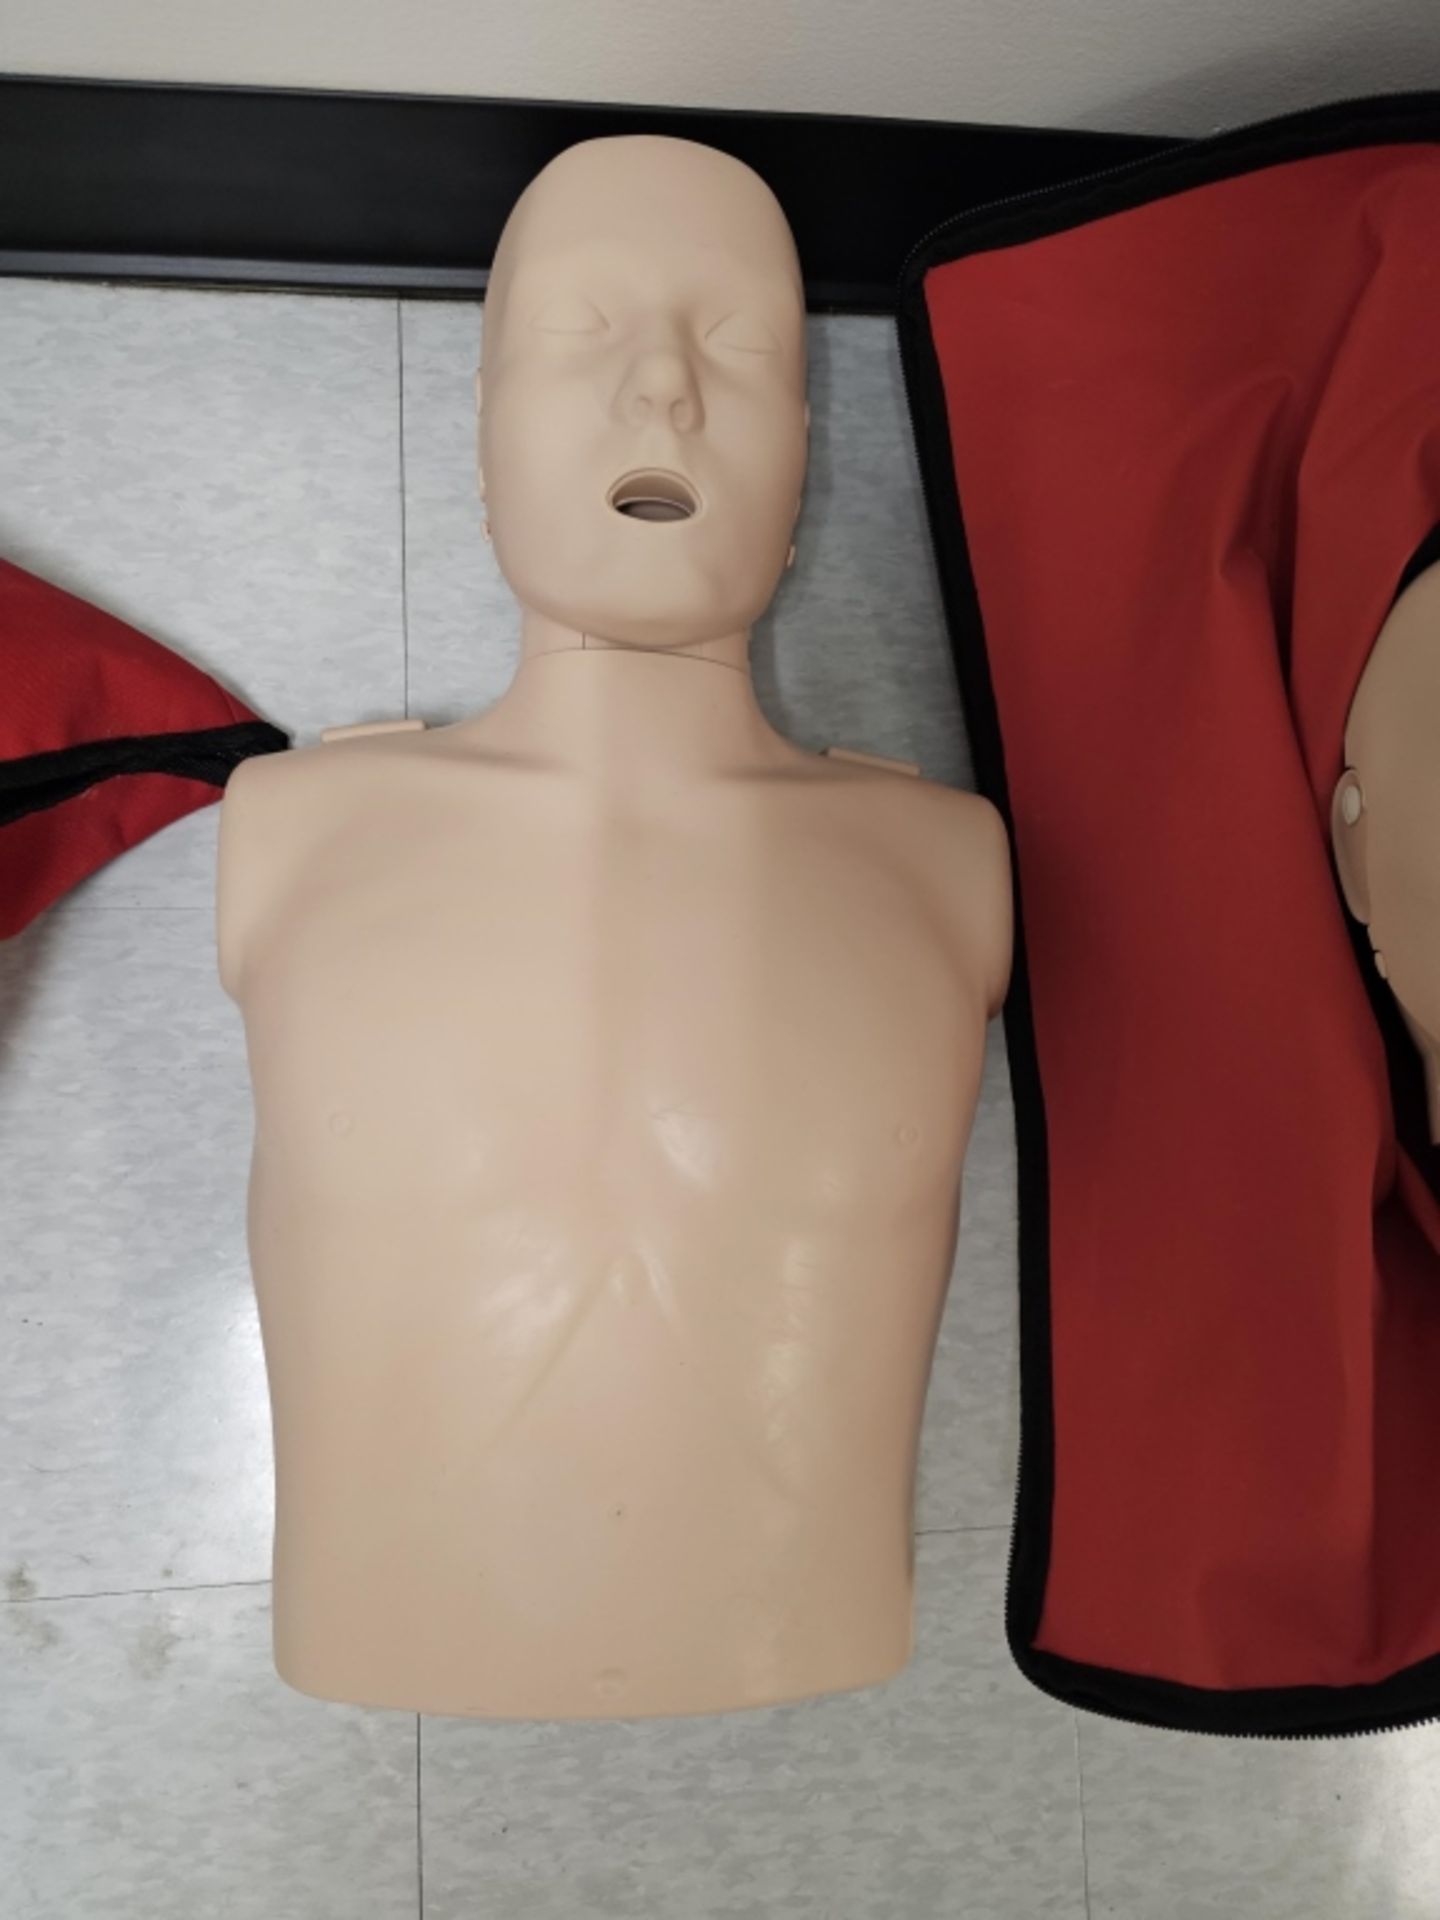 CPR Practice Lot - Image 3 of 5